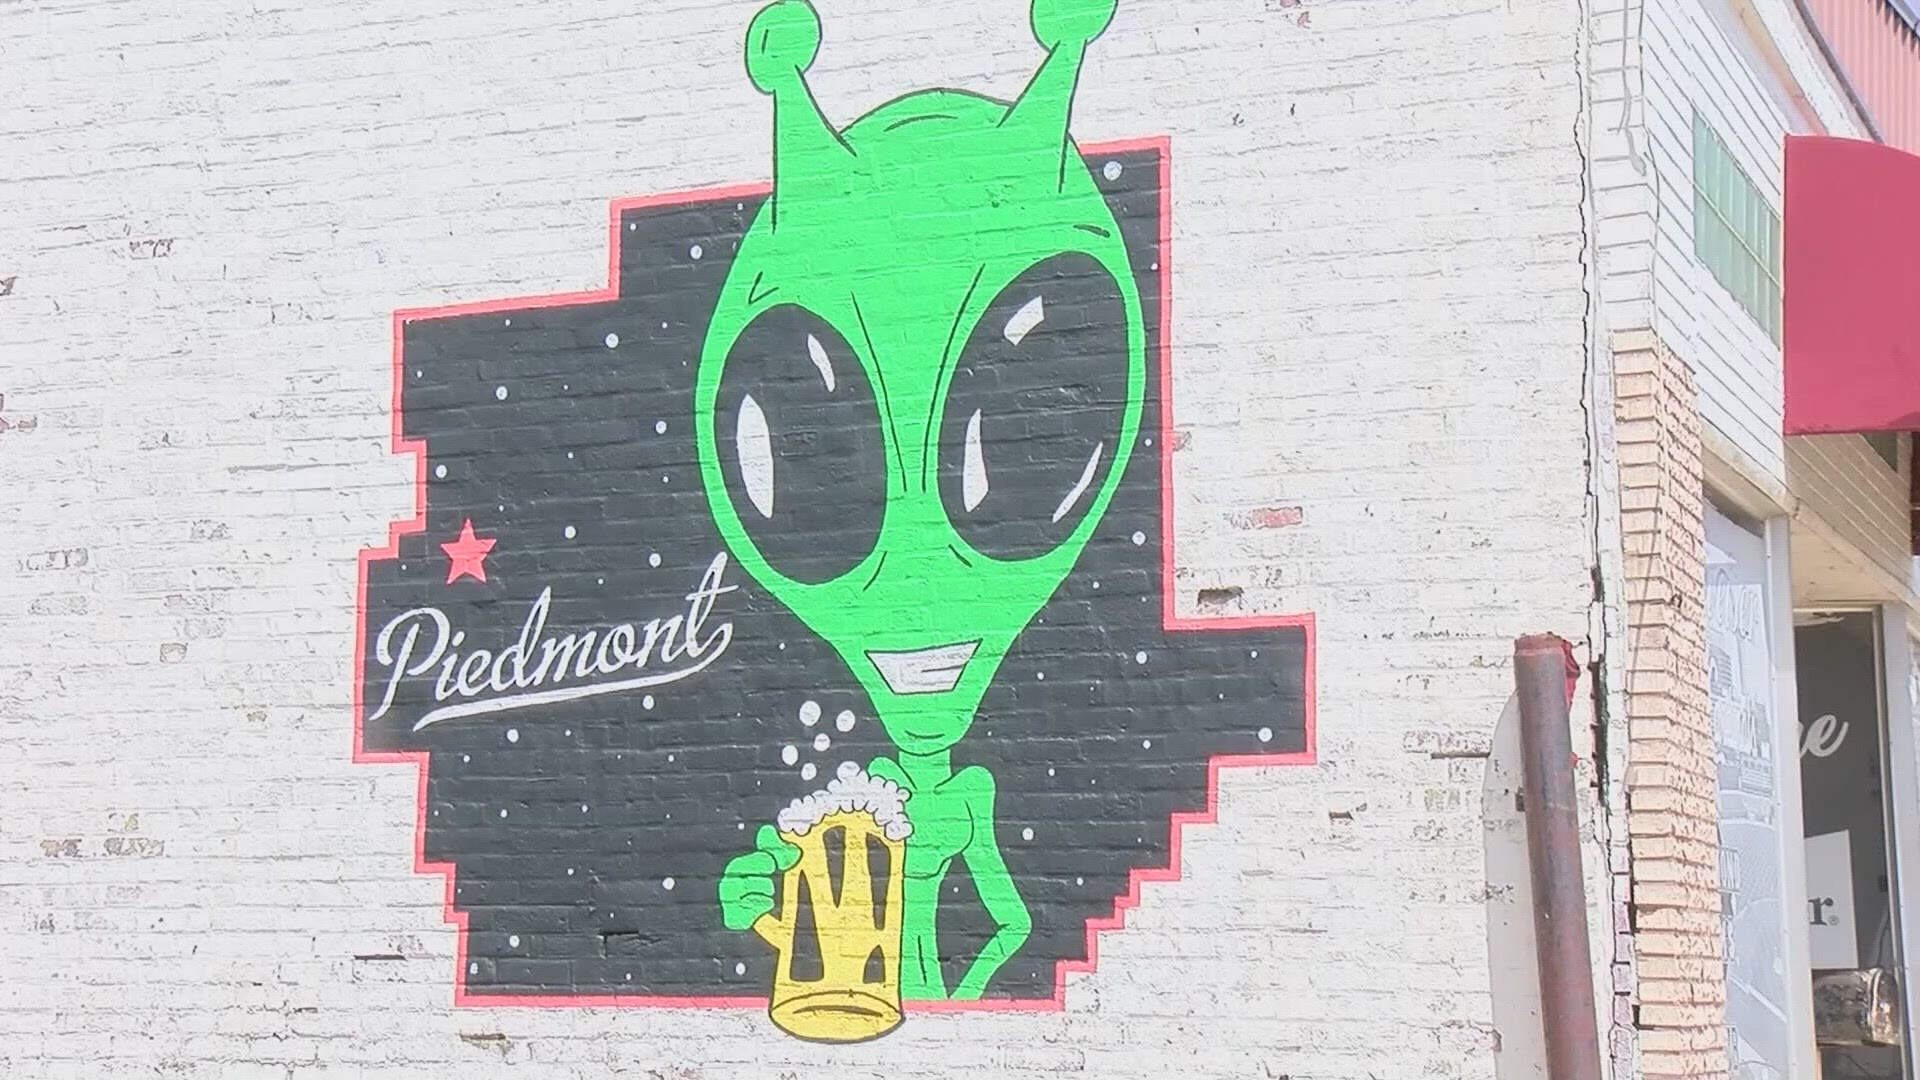 The Missouri General Assembly will designated Piedmont and Wayne County as the UFO capitals of Missouri. It marks the 50th anniversary of alleged sightings there.